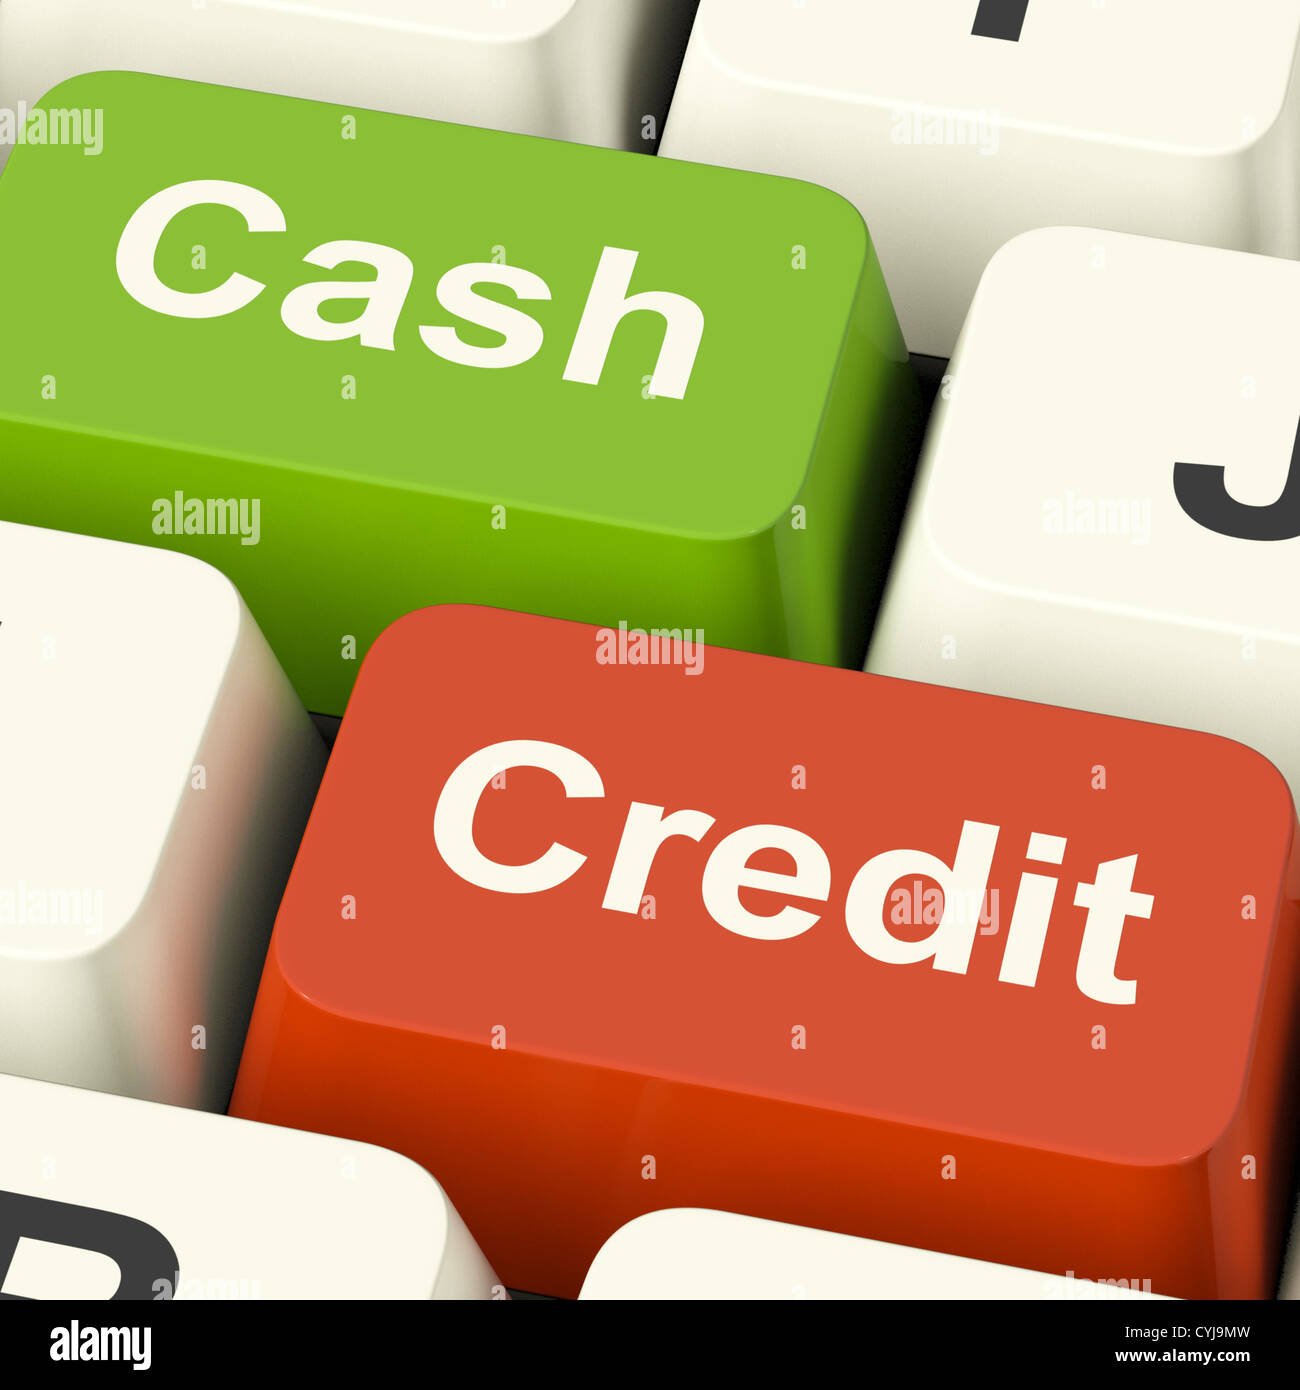 Cash And Credit Keys Showing Consumer Purchases Using Money Or Debts Stock Photo